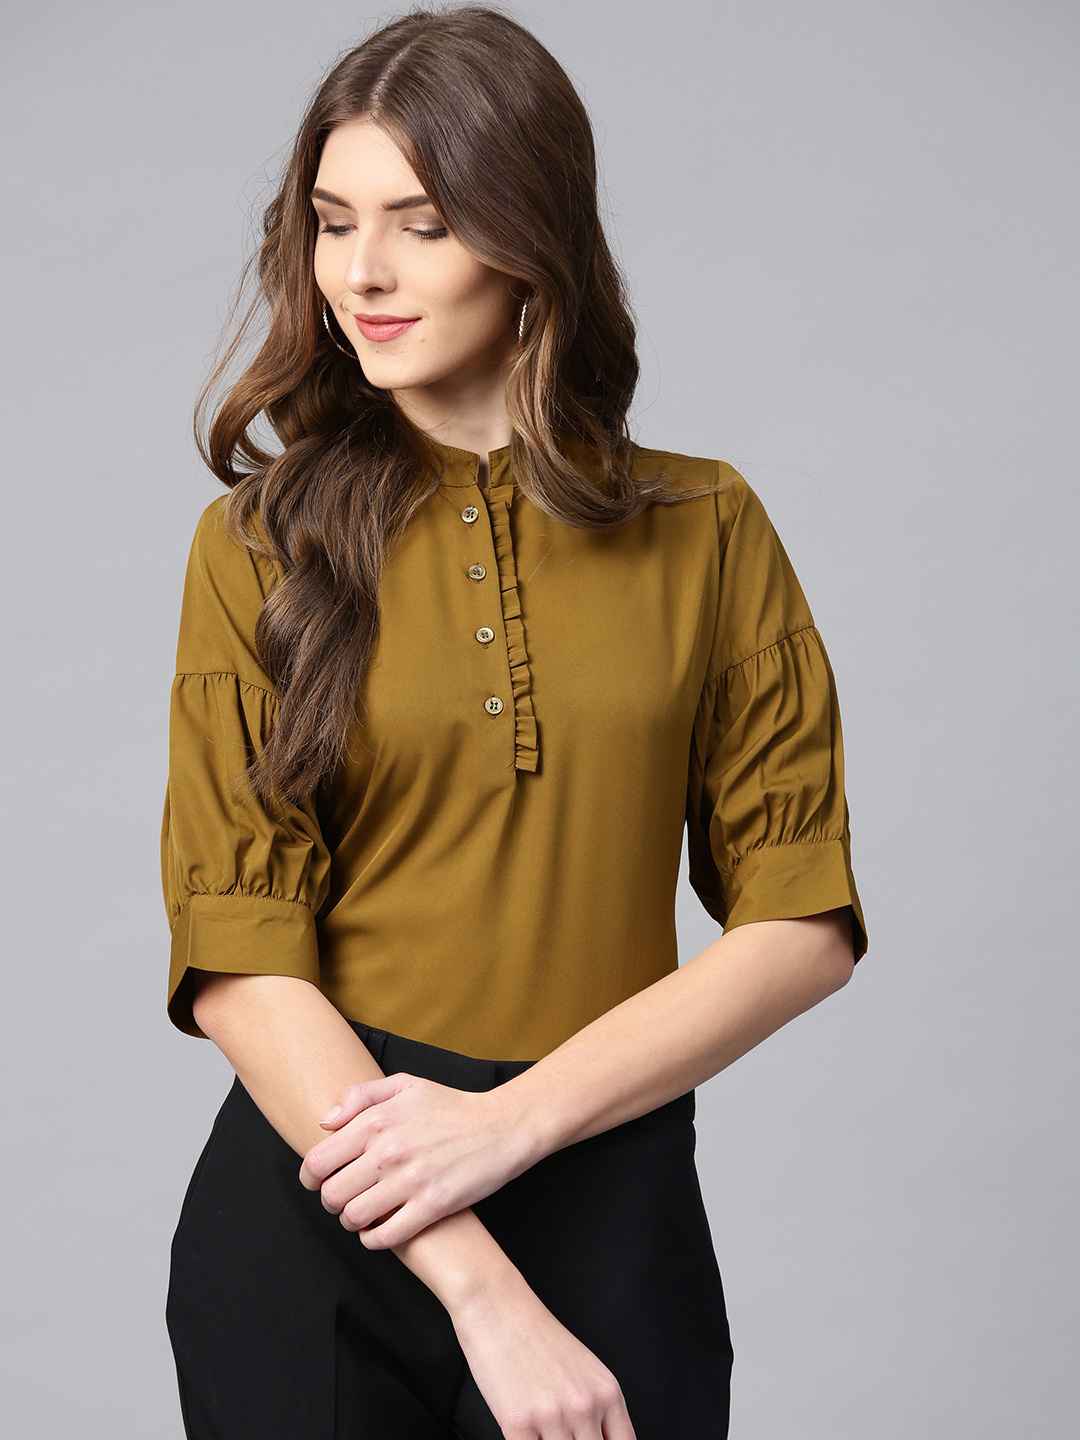 Ives-Women-Olive-Green-Solid-Shirt-Style-Top